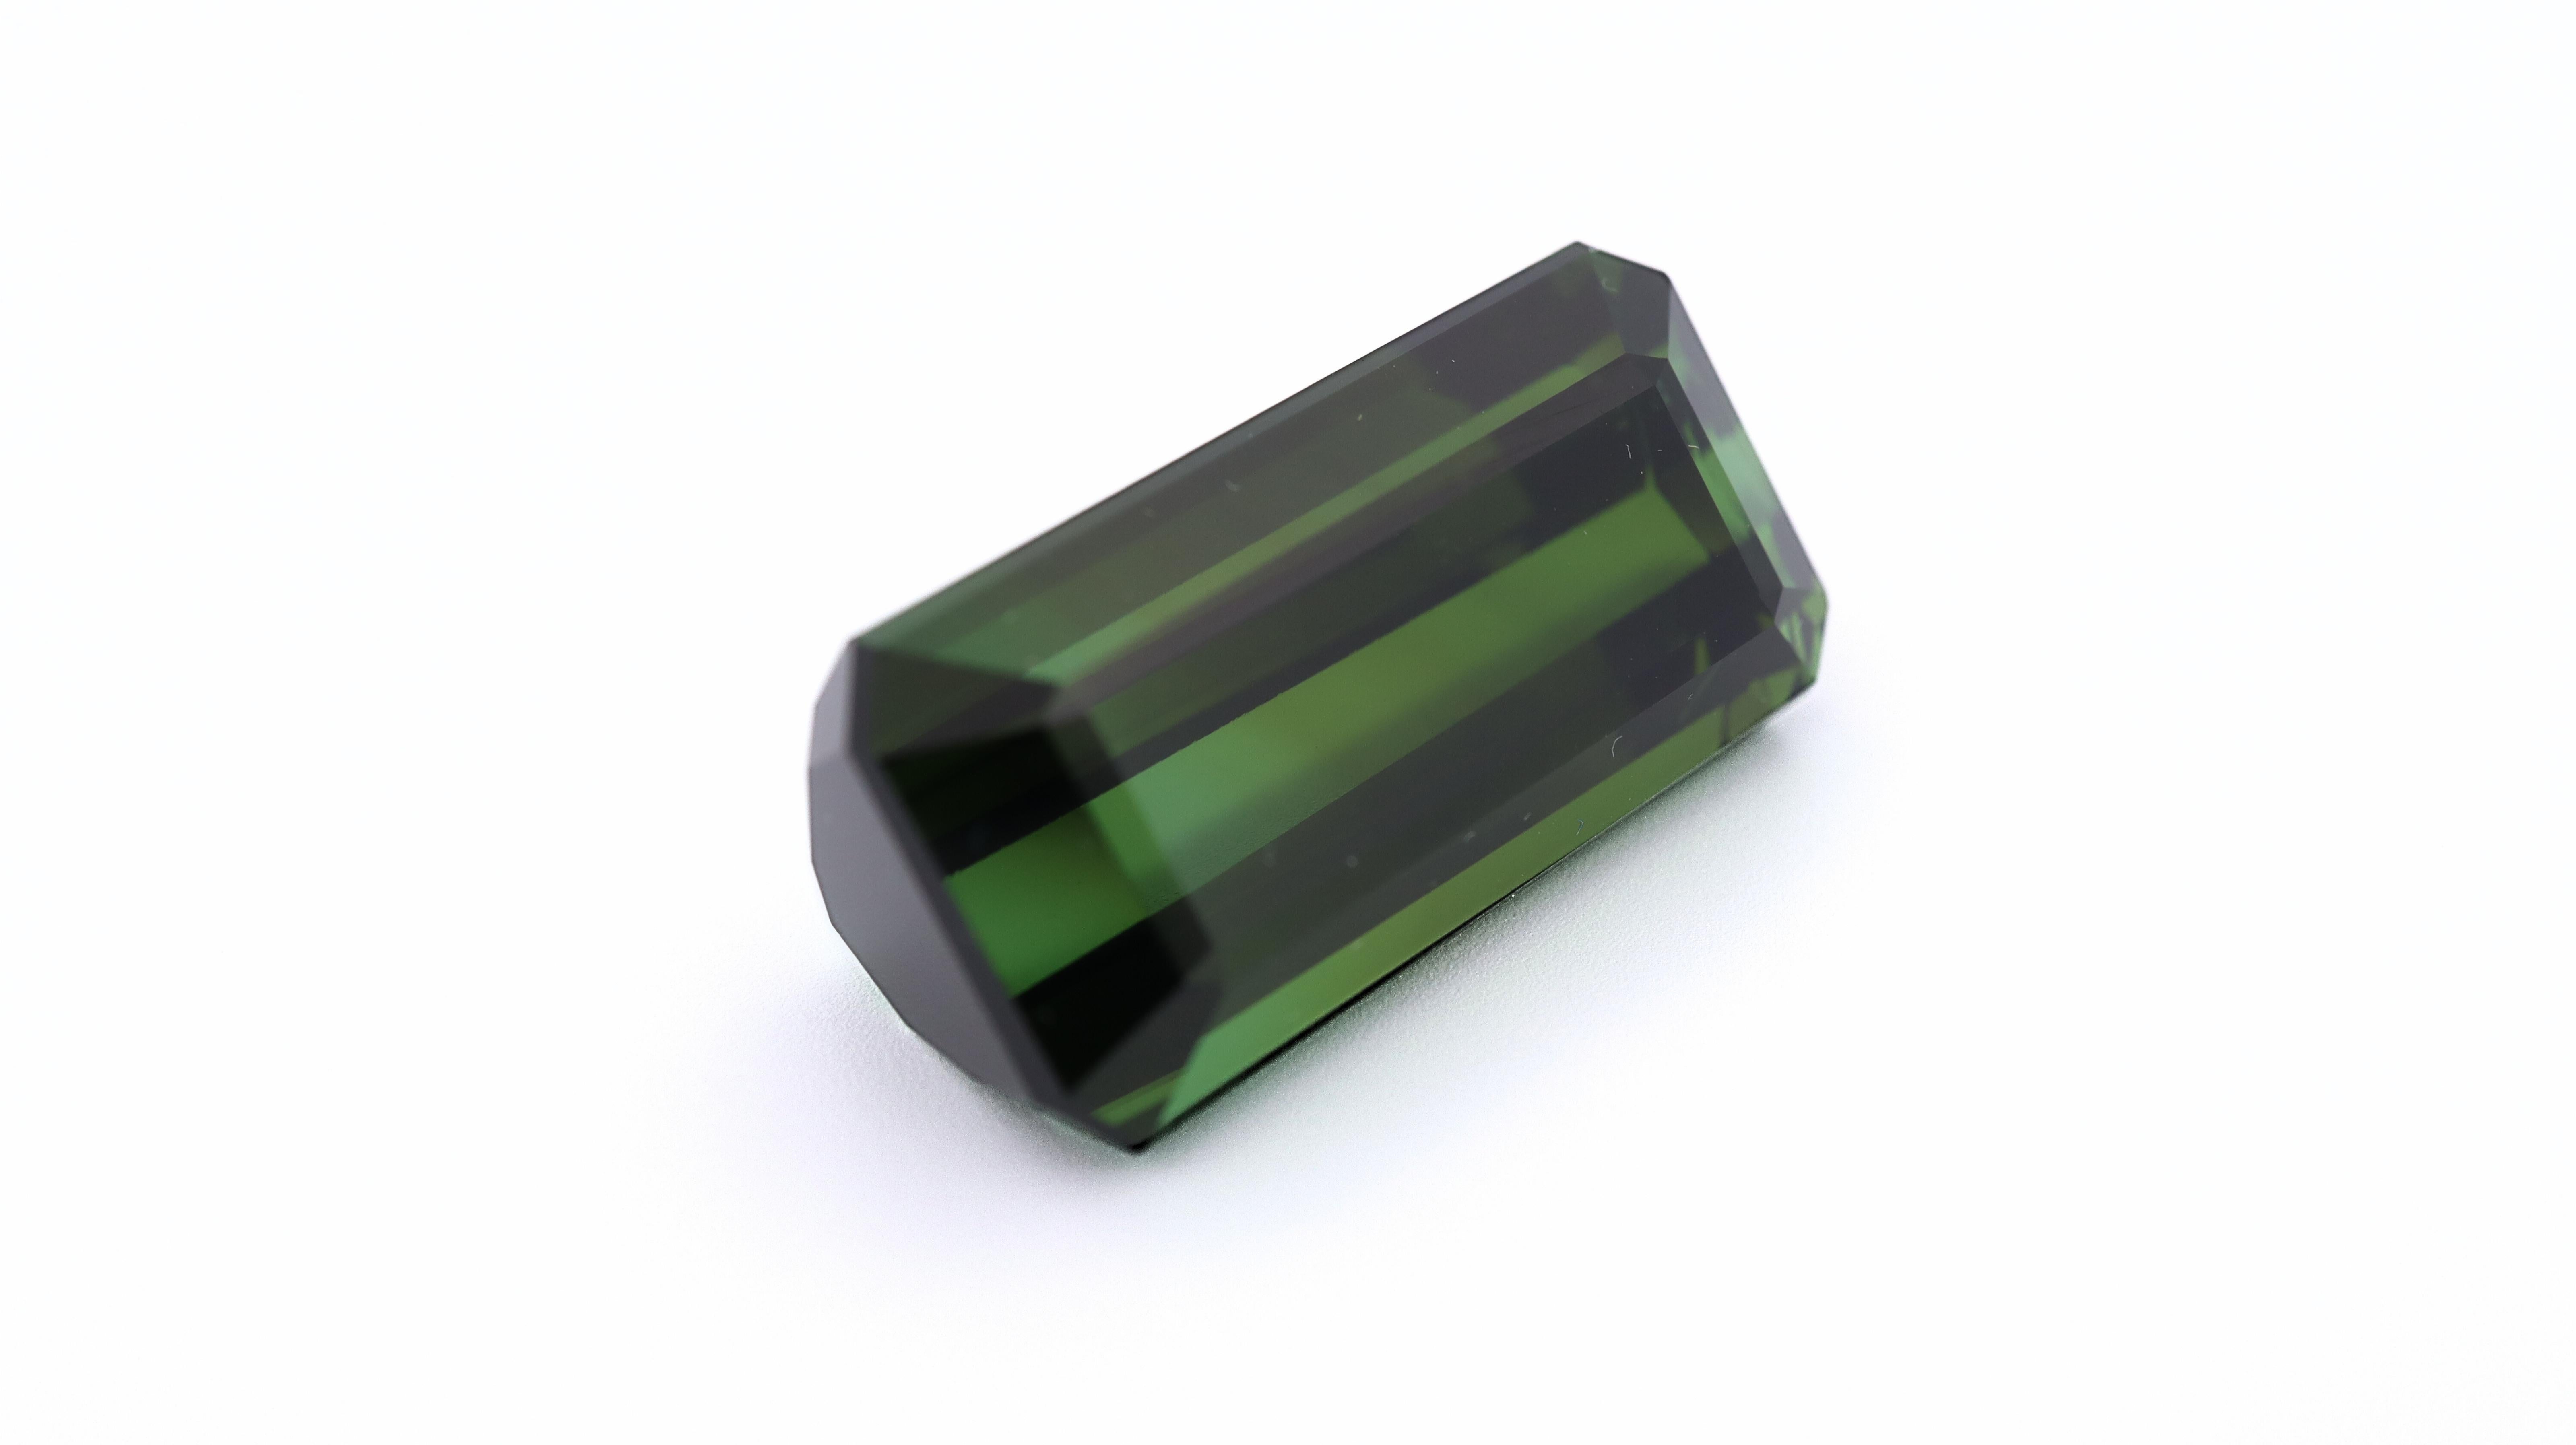 Octagon Cut Certified Vivid Green Tourmaline - 24.82ct For Sale